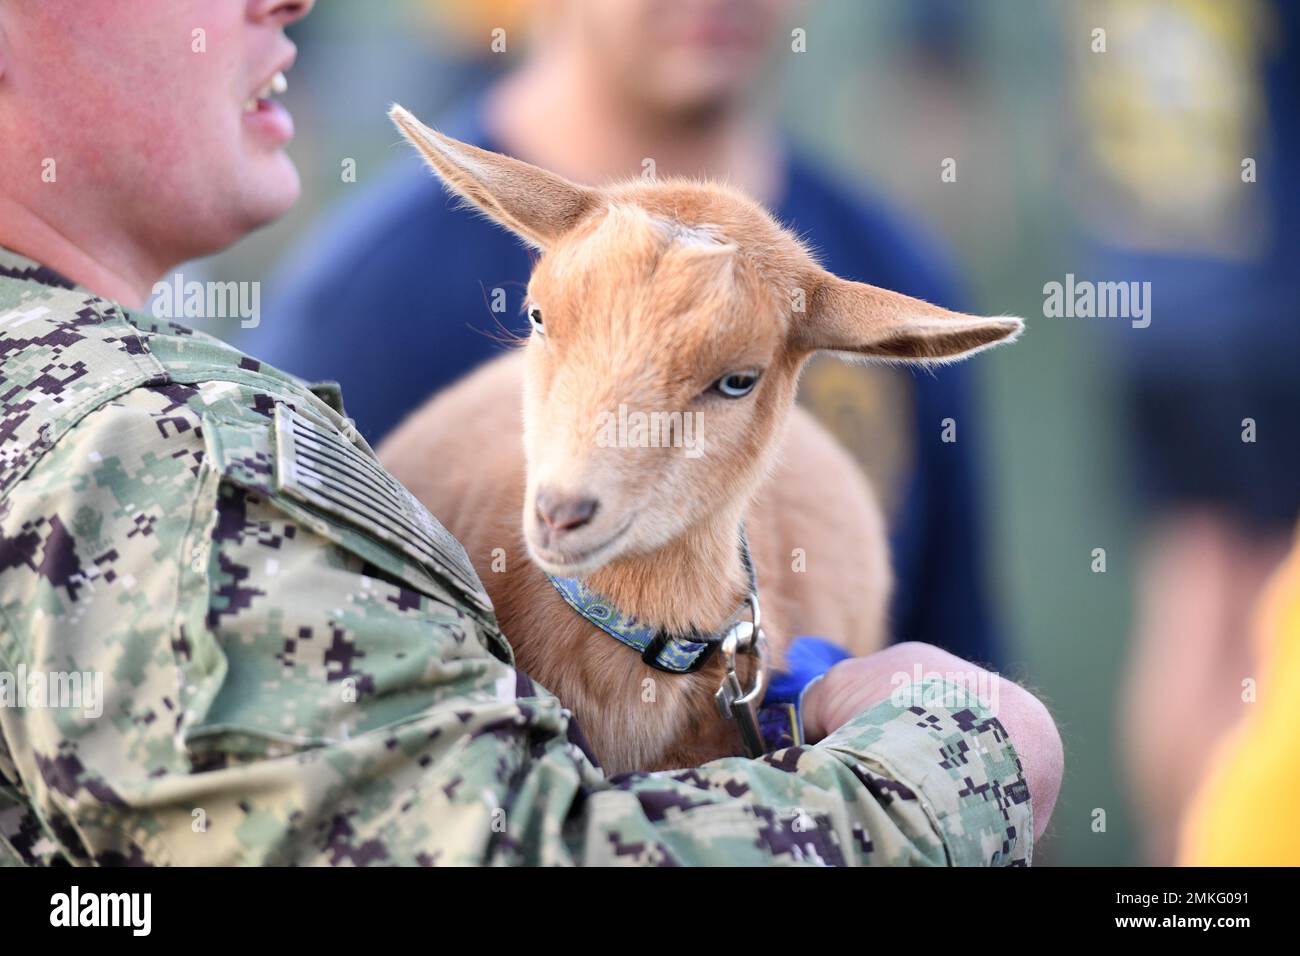 220909-N-GR655-0082 GROTON, Conn. (September 9, 2022) – Millie, a baby goat and mascot for the Groton area chief petty officer selects, observes a morning physical readiness test on board Naval Submarine Base New London in Groton, Conn., Sept. 9. The Fiscal Year 2023 chief selects from all commands in the Groton area are participating in a Navy-wide six-week training period designed to increase confidence, trust, and teamwork. Stock Photo